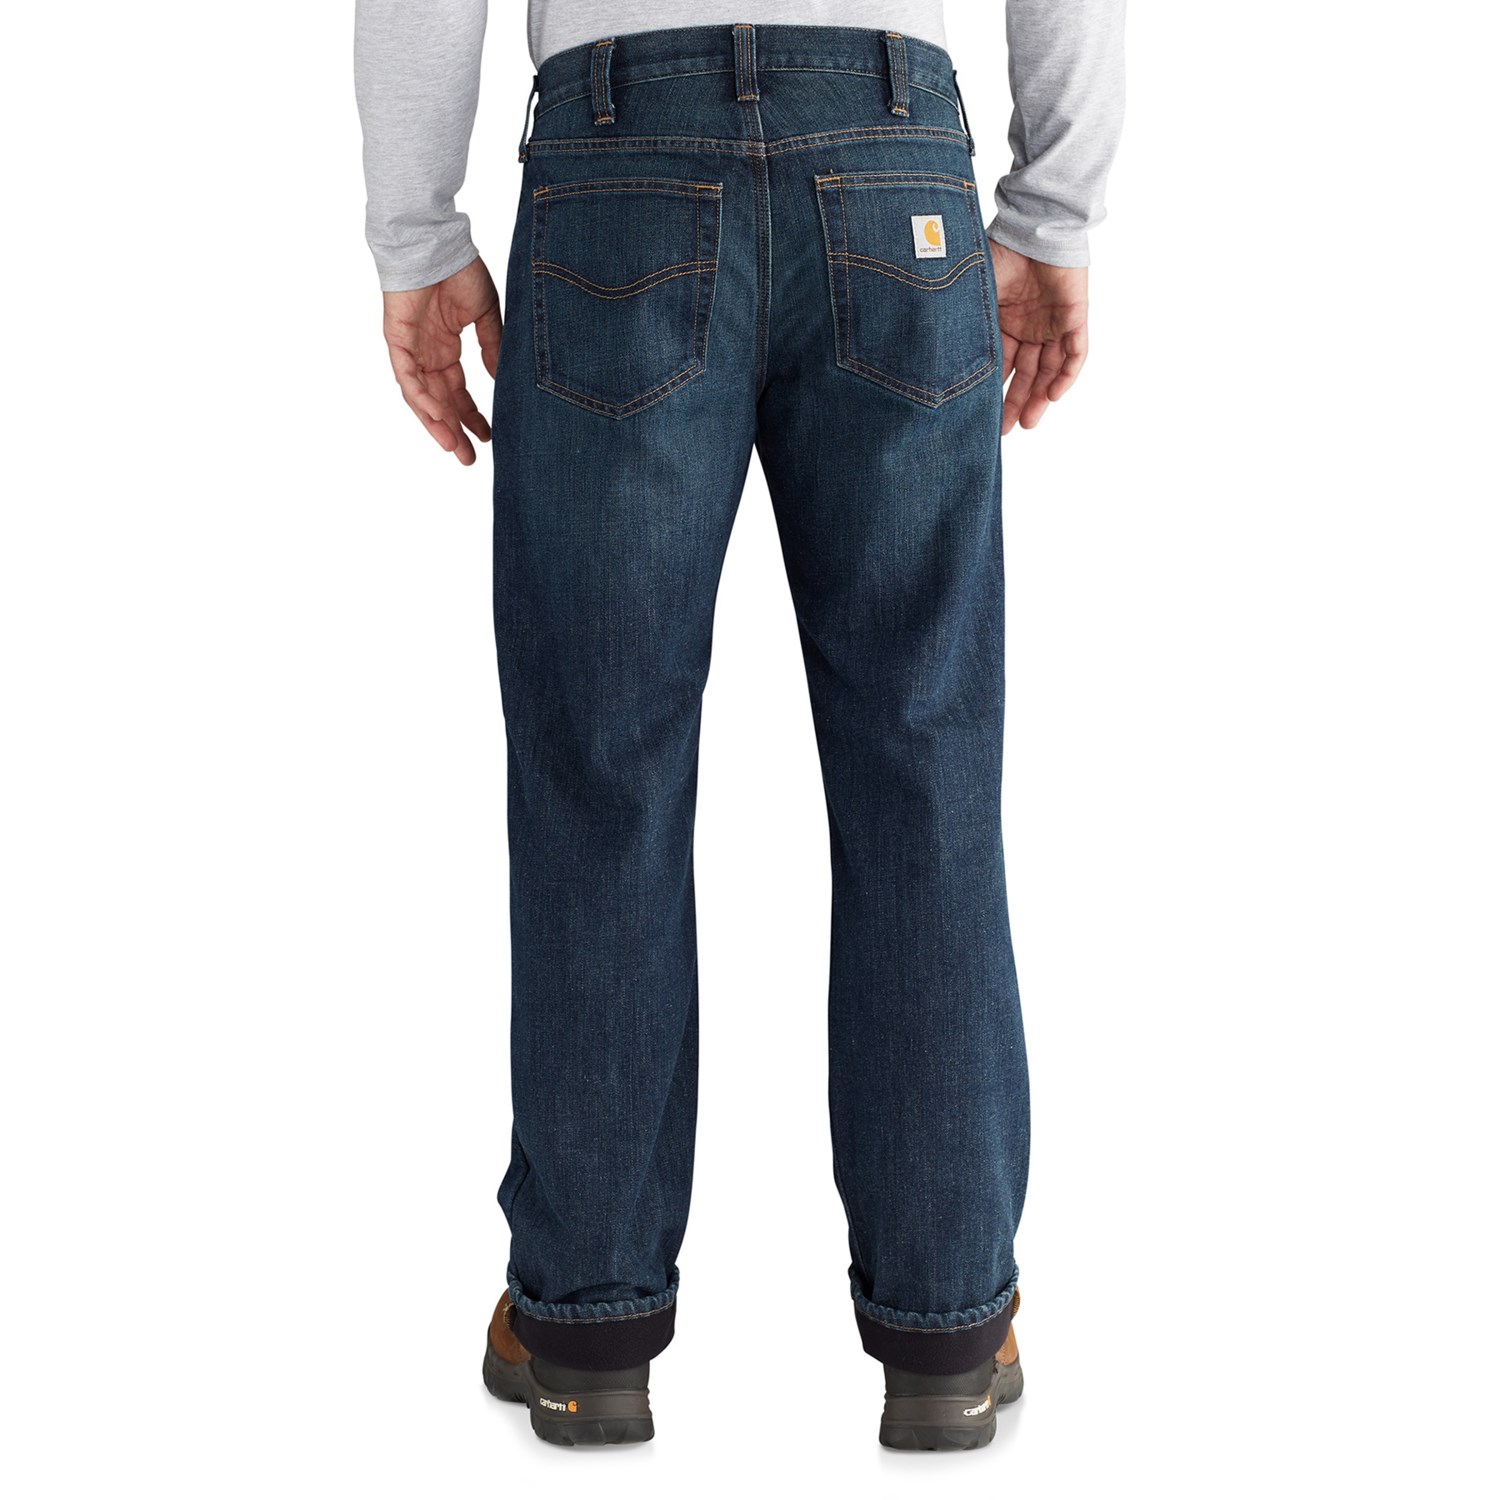 Carhartt 102803 Fleece-Lined 5-Pocket Jeans (For Big and Tall Men)